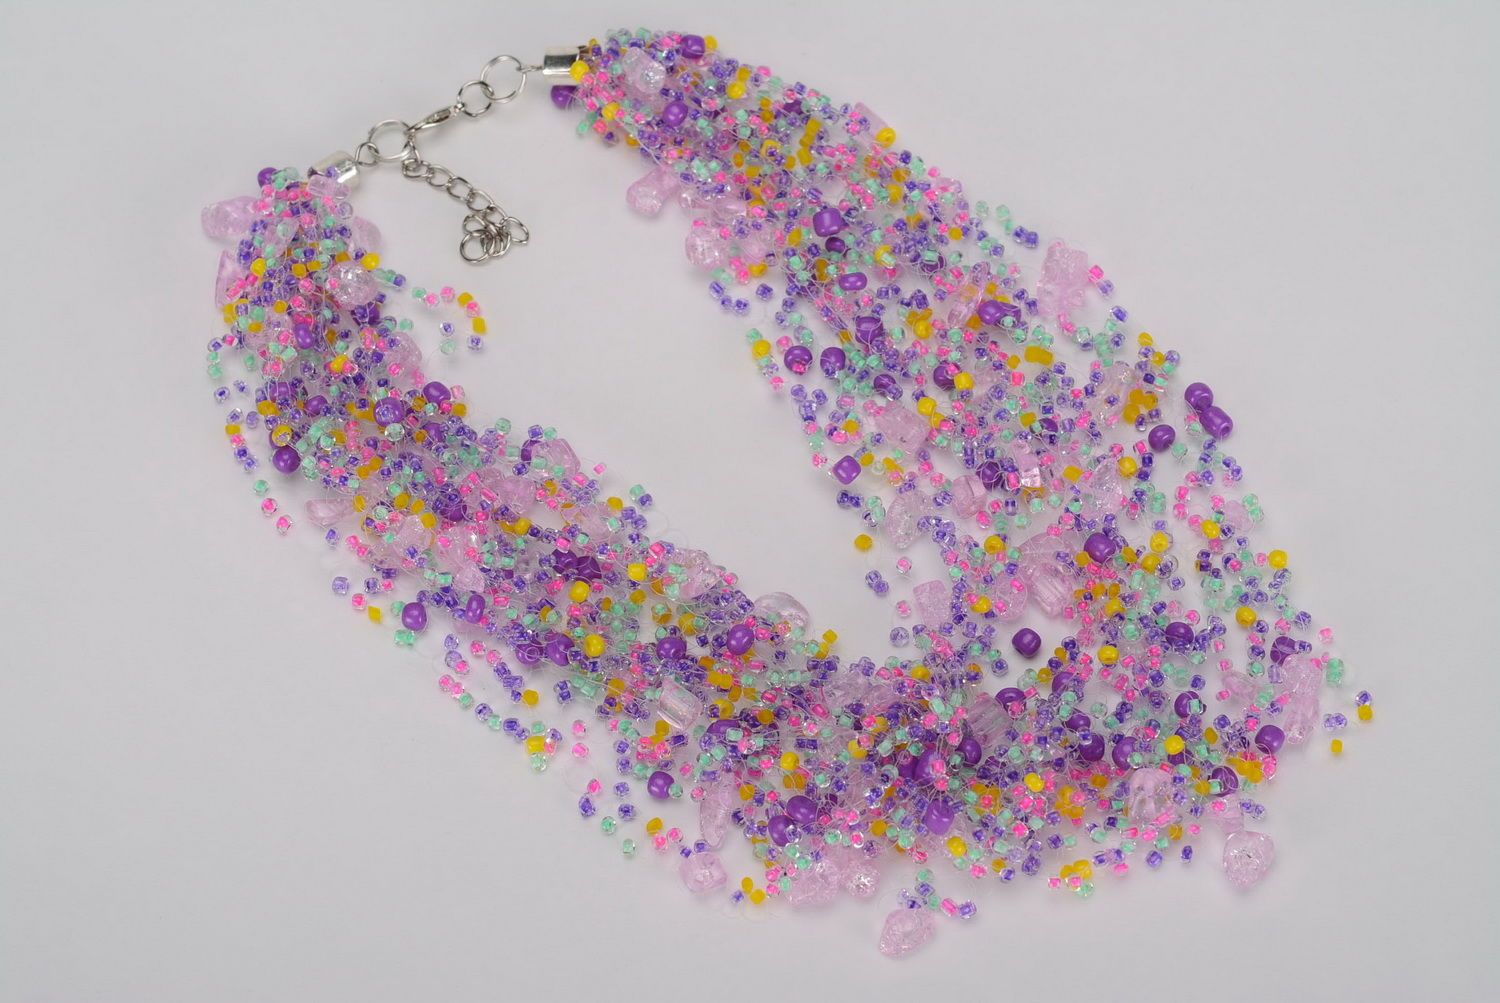 Airy-necklace made of beads photo 1